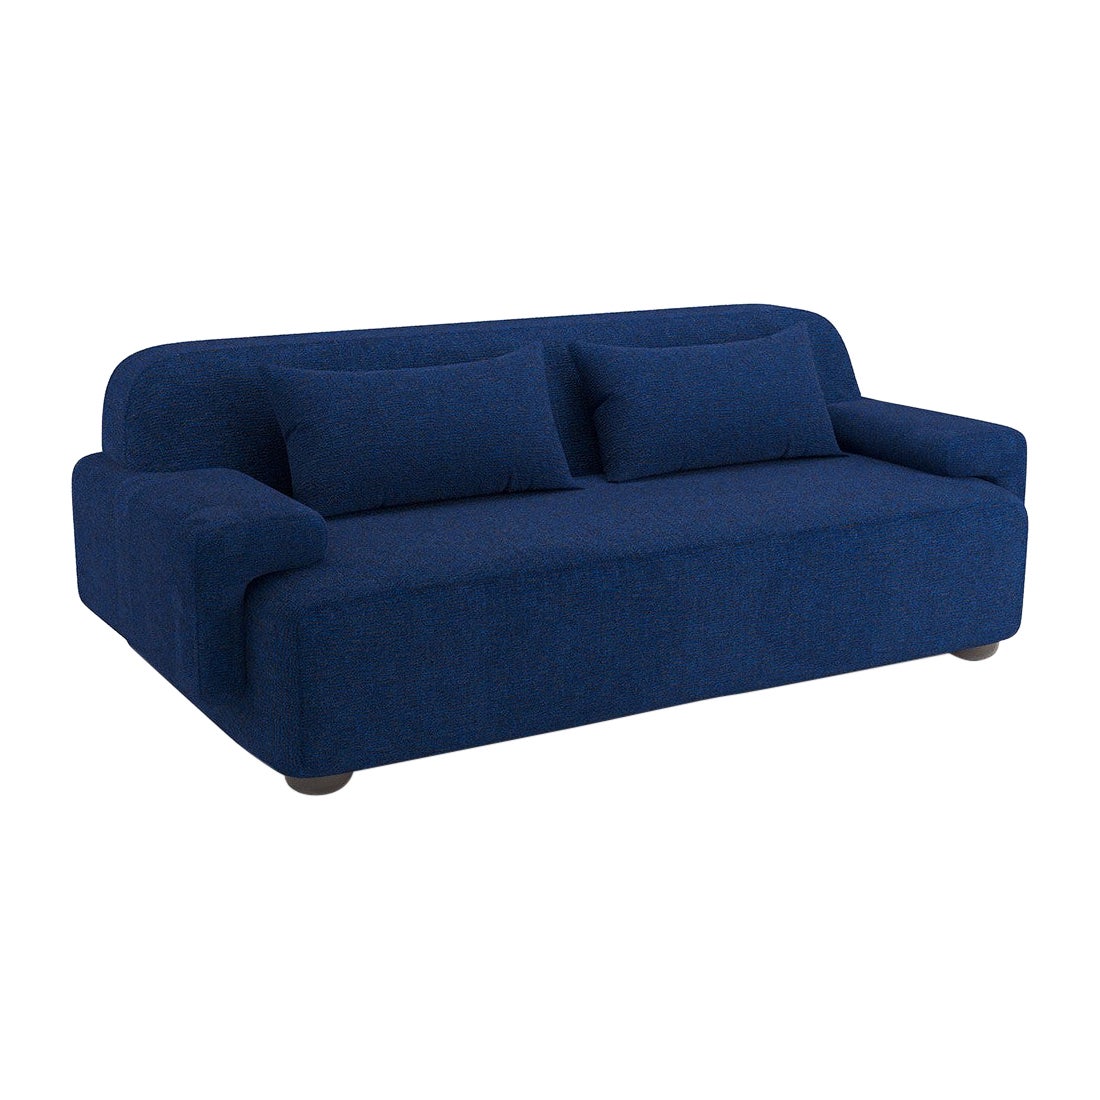 Popus Editions Lena 2.5 Seater Sofa in Ocean Megeve Fabric with Knit Effect